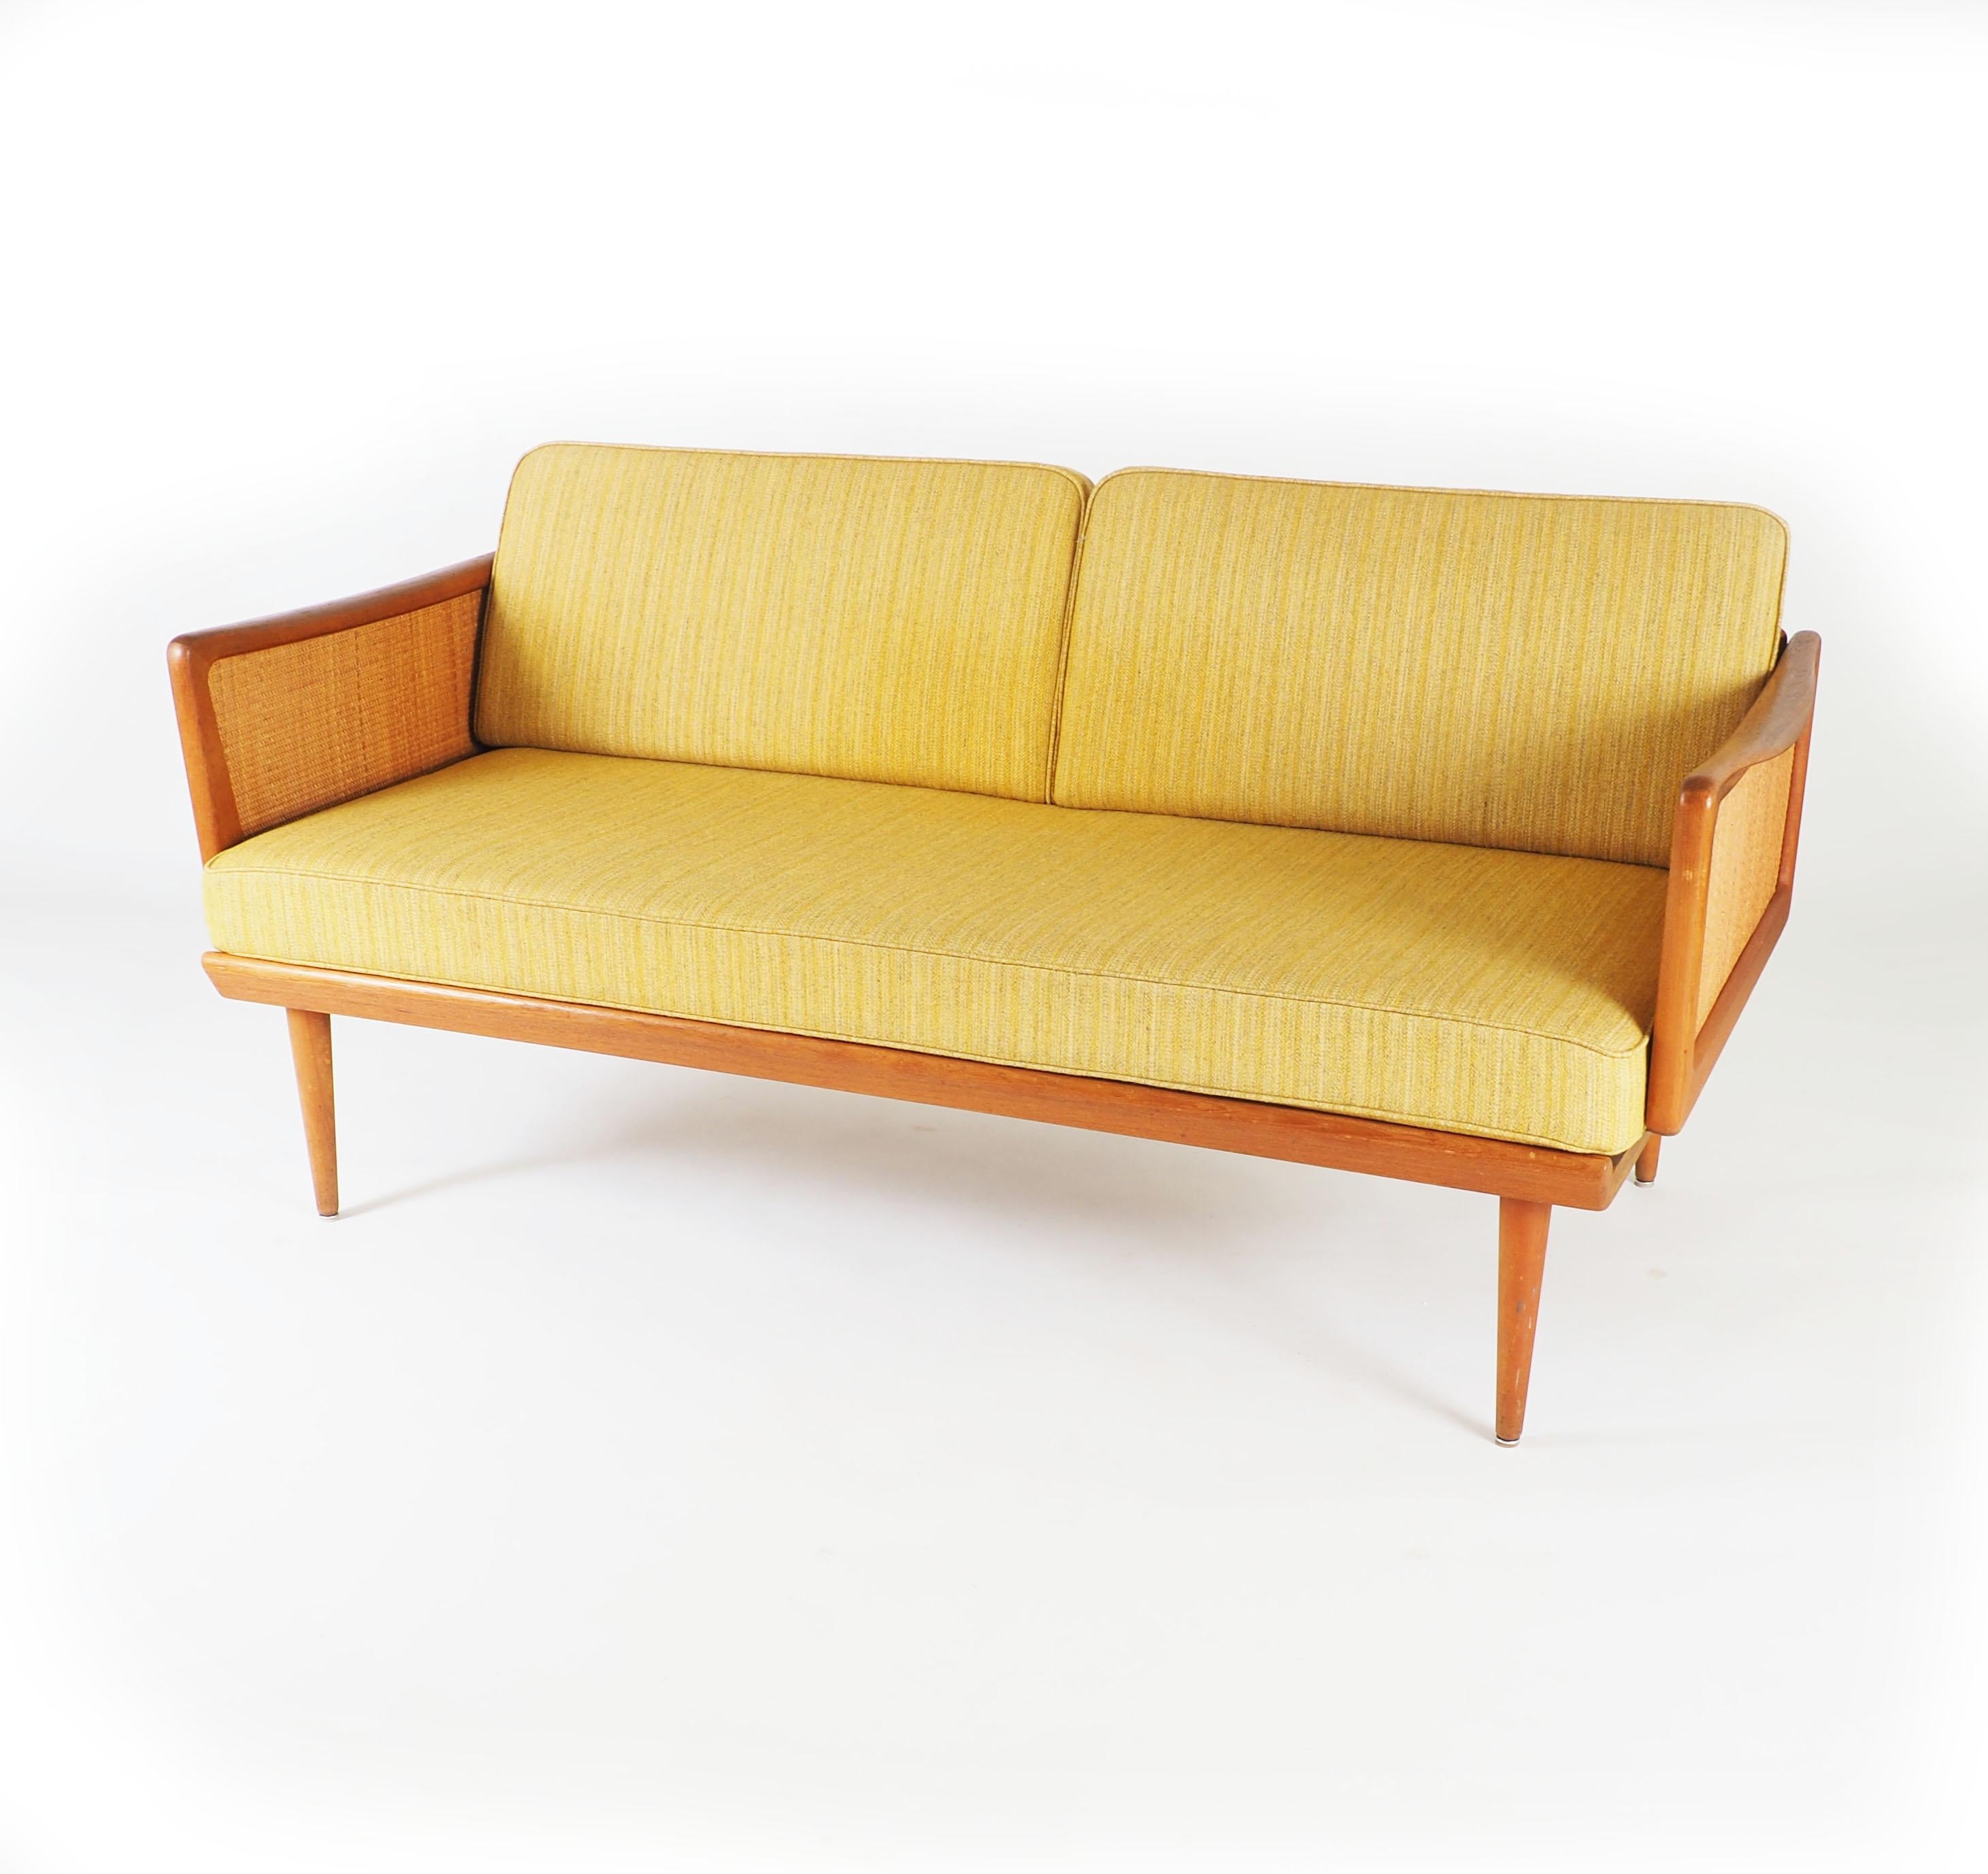 Convertible sofa and daybed by Peter Hvidt and Orla Mølgaard-Nielsen. Made by France and Daverkosen, Denmark in teak and rattan. Model fd451. The side panels can be lowered for a longer resting space.